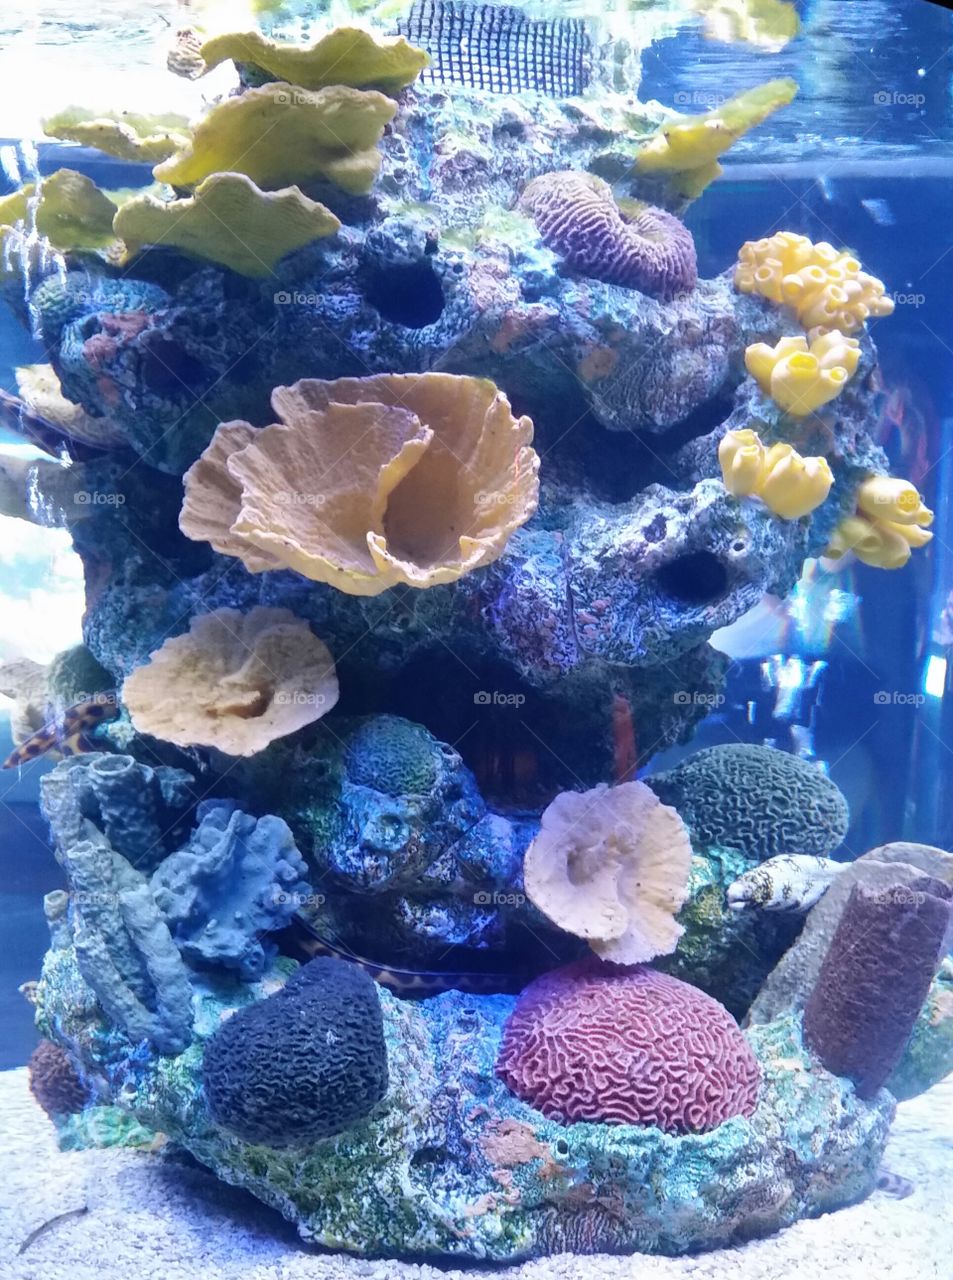 leather coral reef